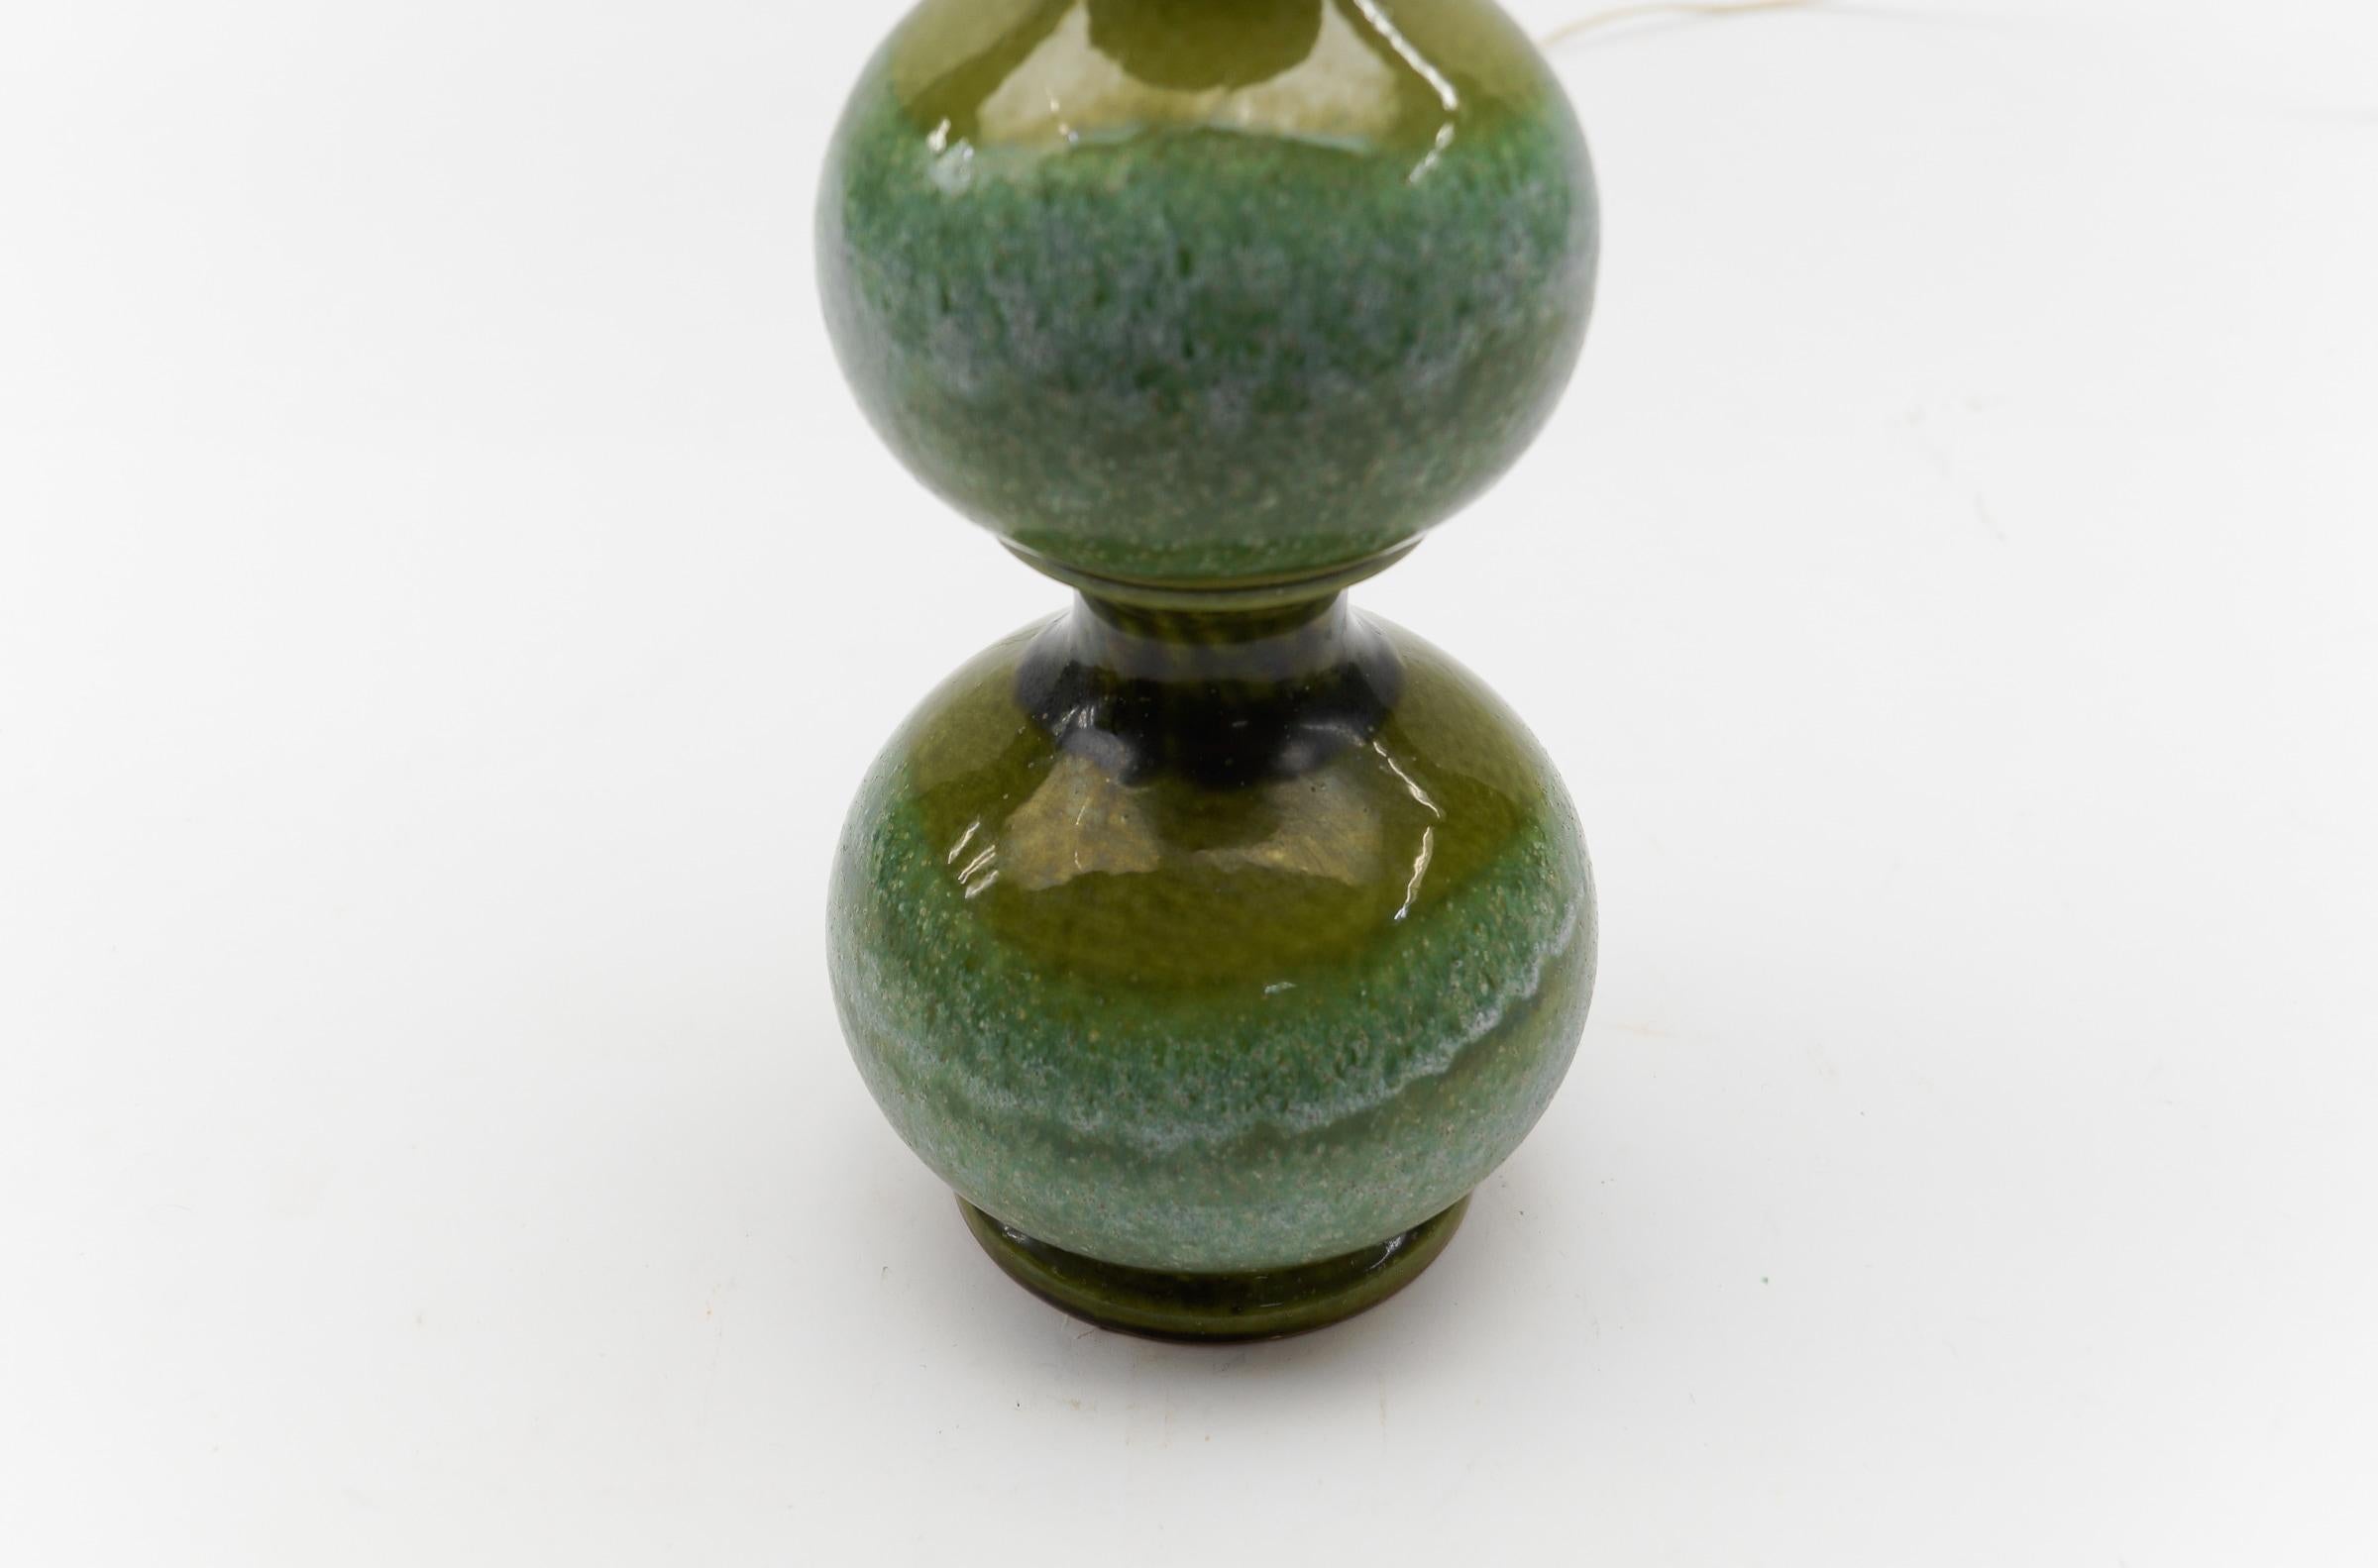 Mid-20th Century Very Rare Green Ceramic Table Lamp Base from Kaiser Leuchten, Germany 1960s - For Sale